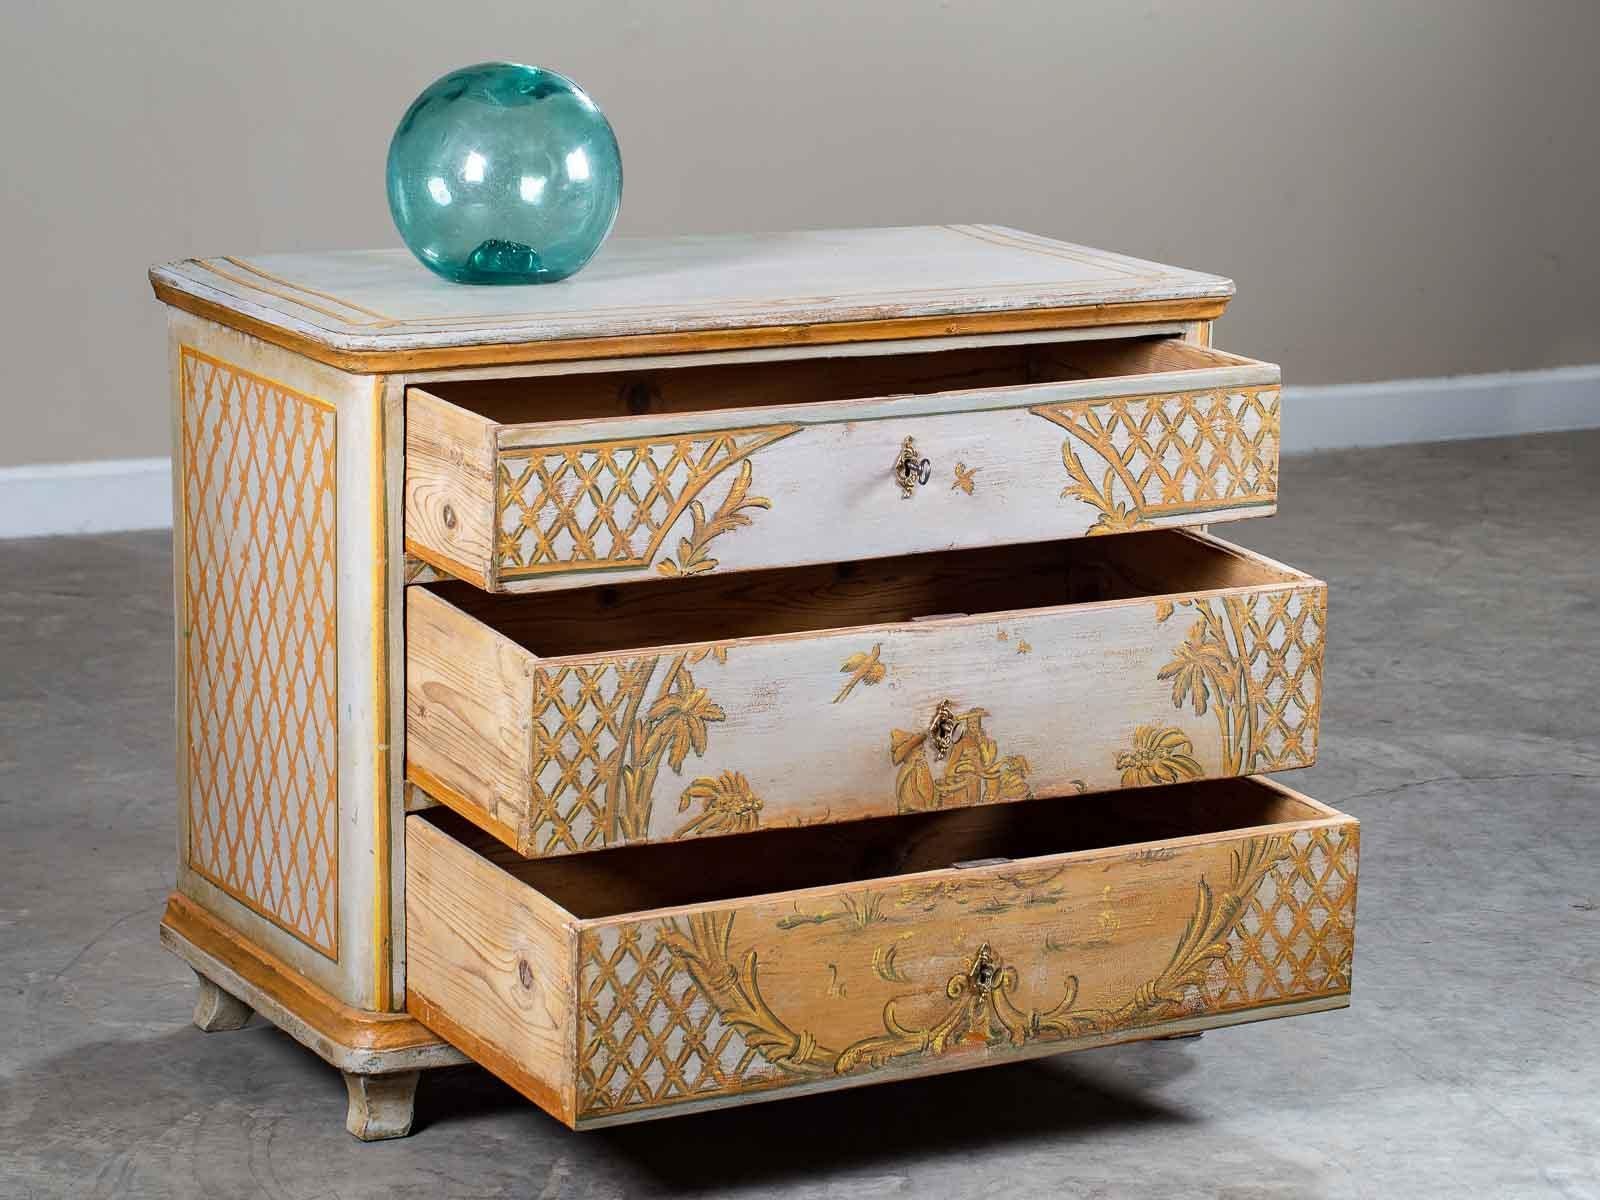 A charming antique German Biedermeier painted chest of drawers, circa 1830. The handsome Rococo design of the refreshed painted finish features a hand-painted design of trellis pattern on each side while on the front the trellis frames the central